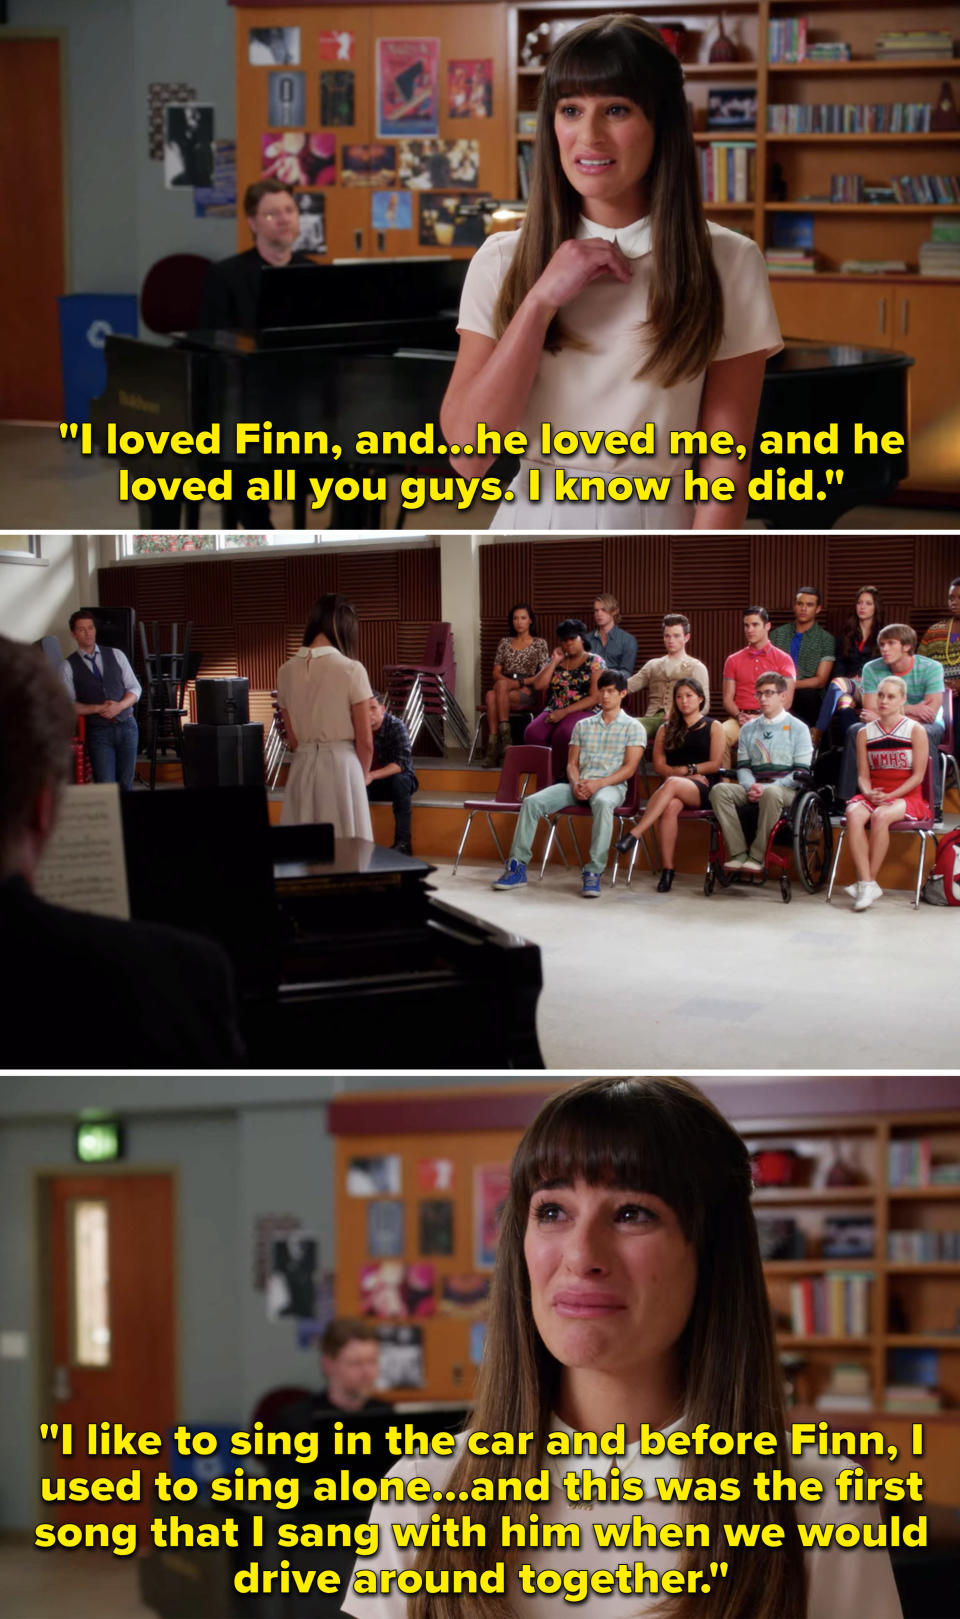 Rachel saying Finn loved her and everyone in Glee Club, and then saying she used to sing alone in the car before Finn